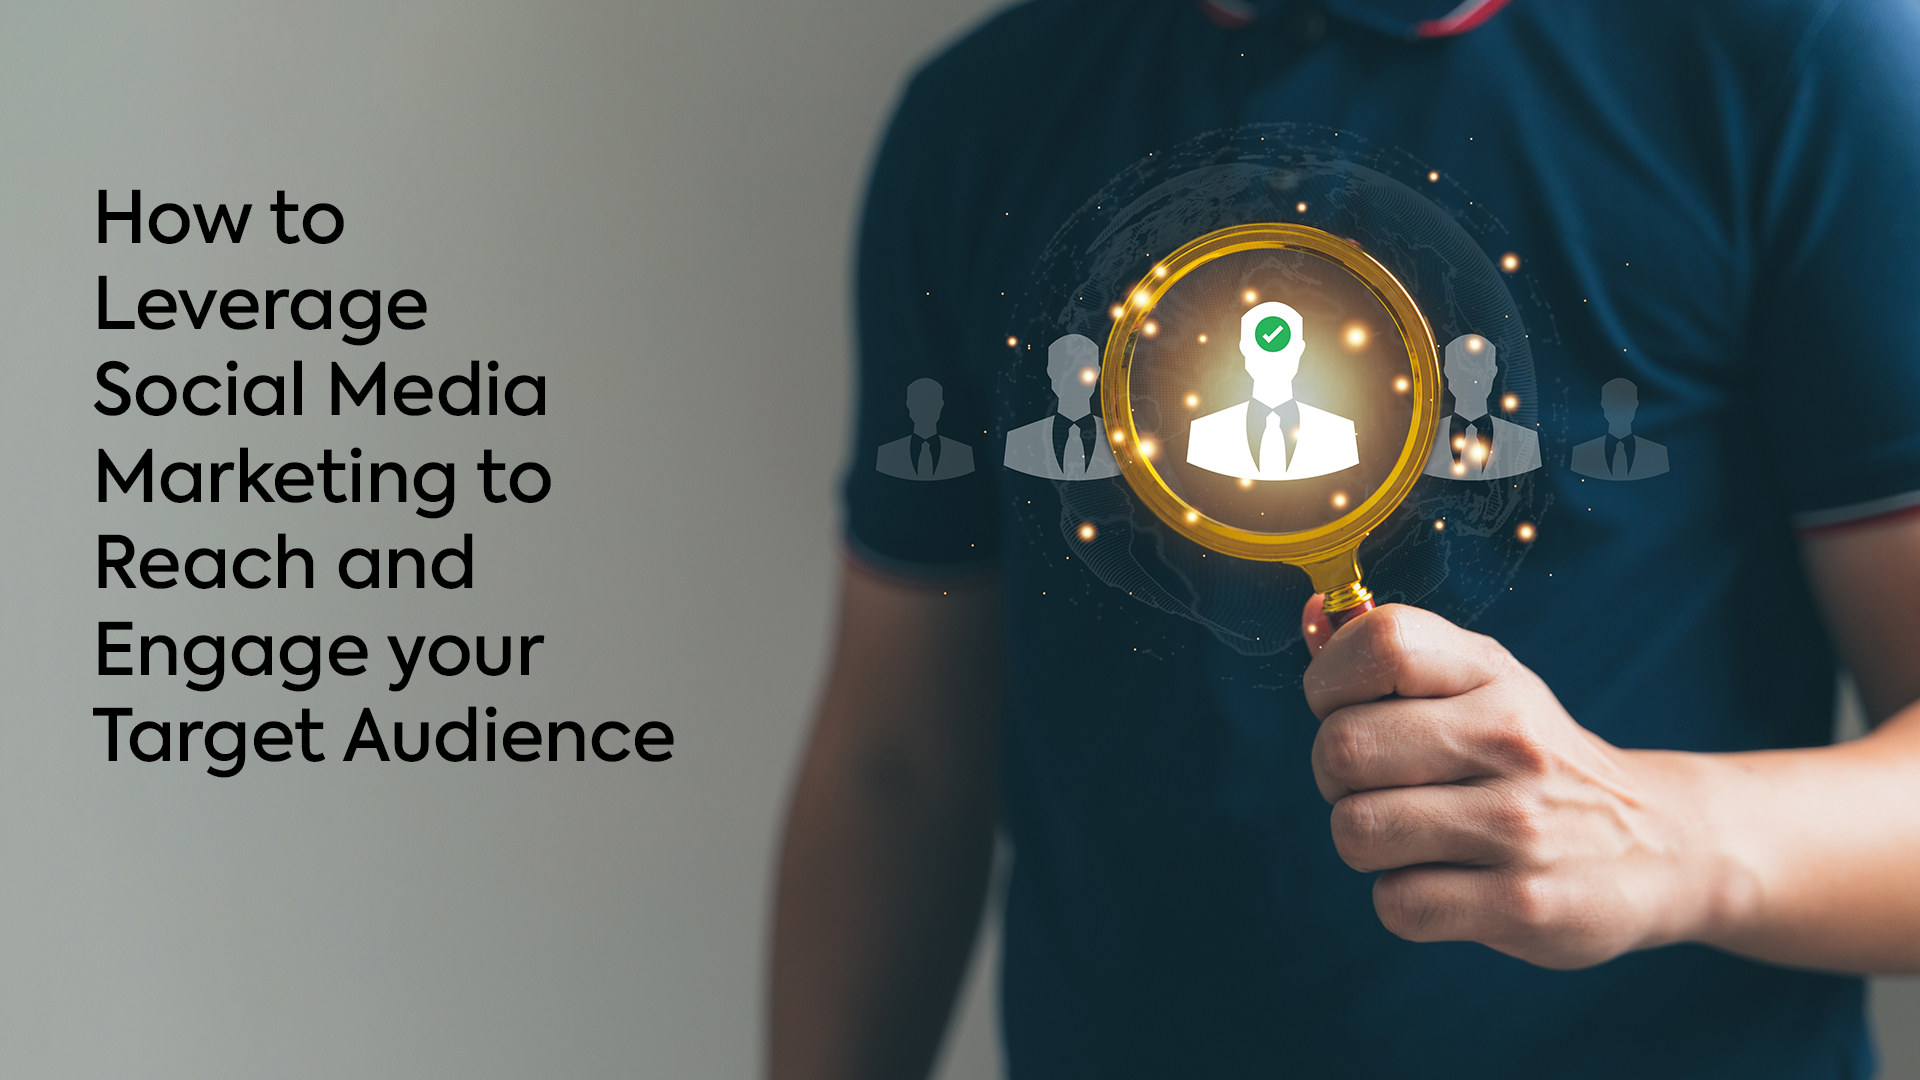 How to Leverage Social Media Marketing to Reach and Engage your Target Audience